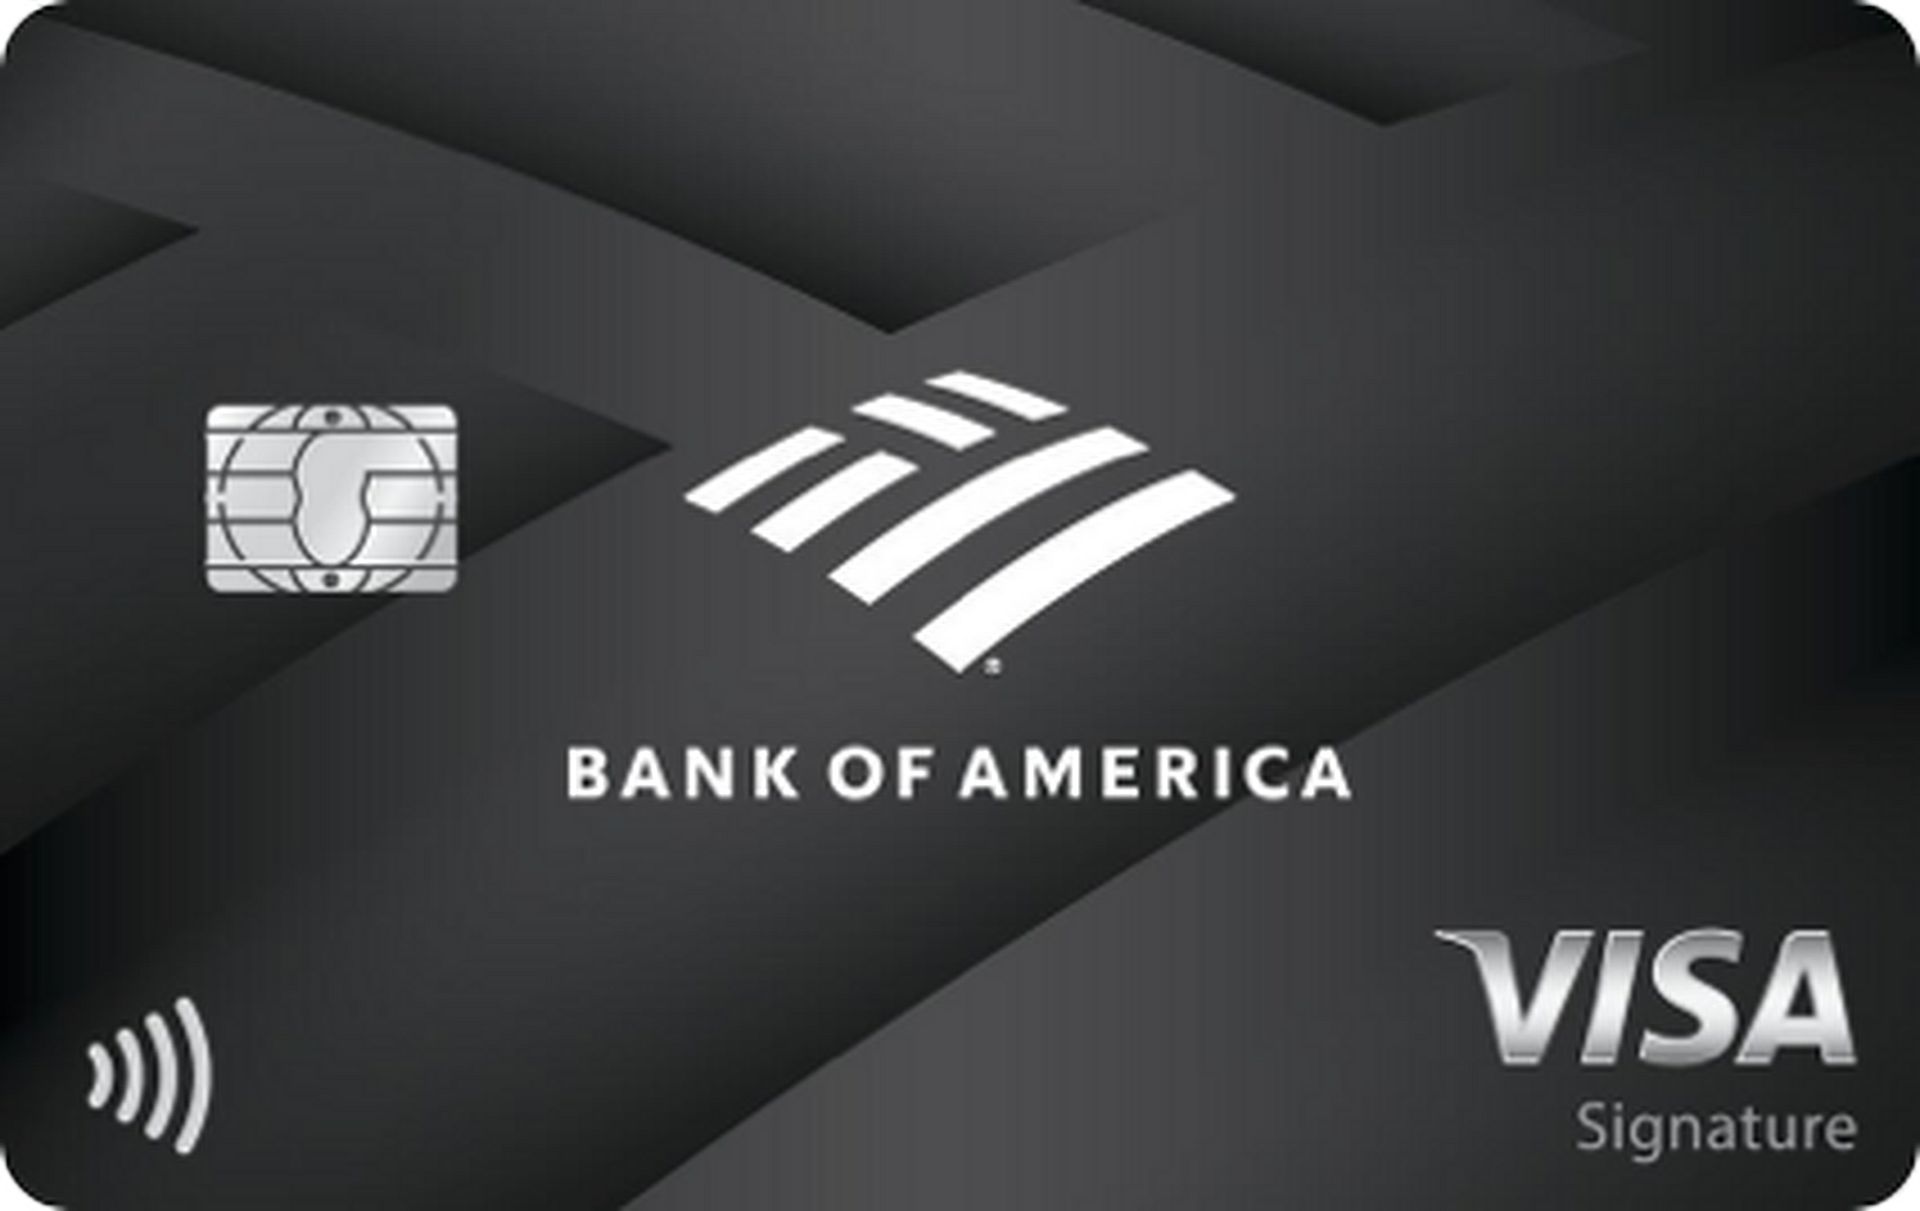 Bank of America Data Breach: What went wrong?